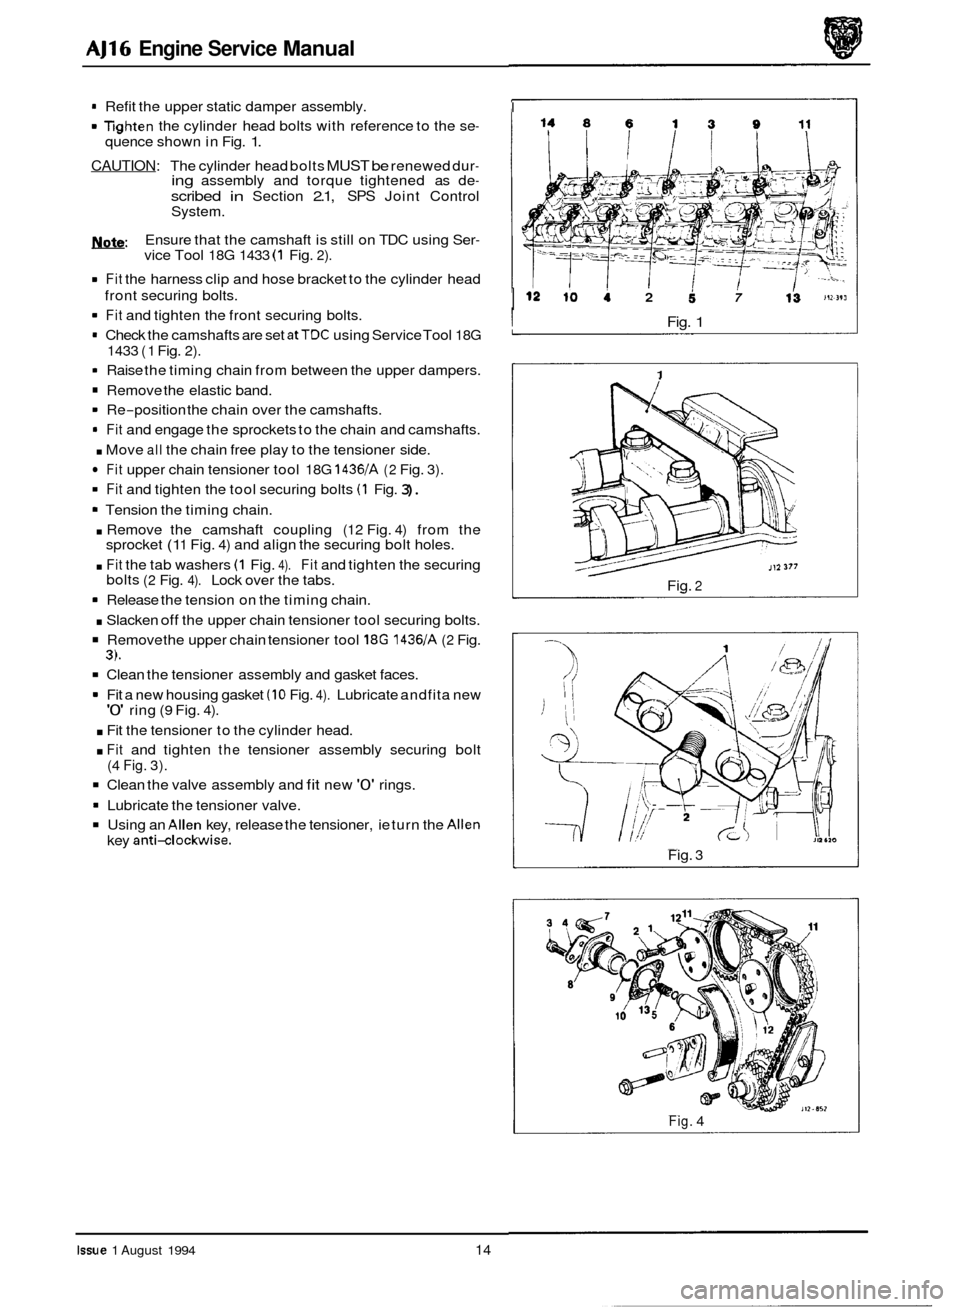 JAGUAR XJ 1994 2.G AJ16 Engine Manual AJ16 Engine Service Manual 
= Refit the upper static damper  assembly. 
lighten the cylinder  head bolts  with reference  to the  se- quence  shown in Fig. 1. 
CAUTION: The cylinder head  bolts MUST b